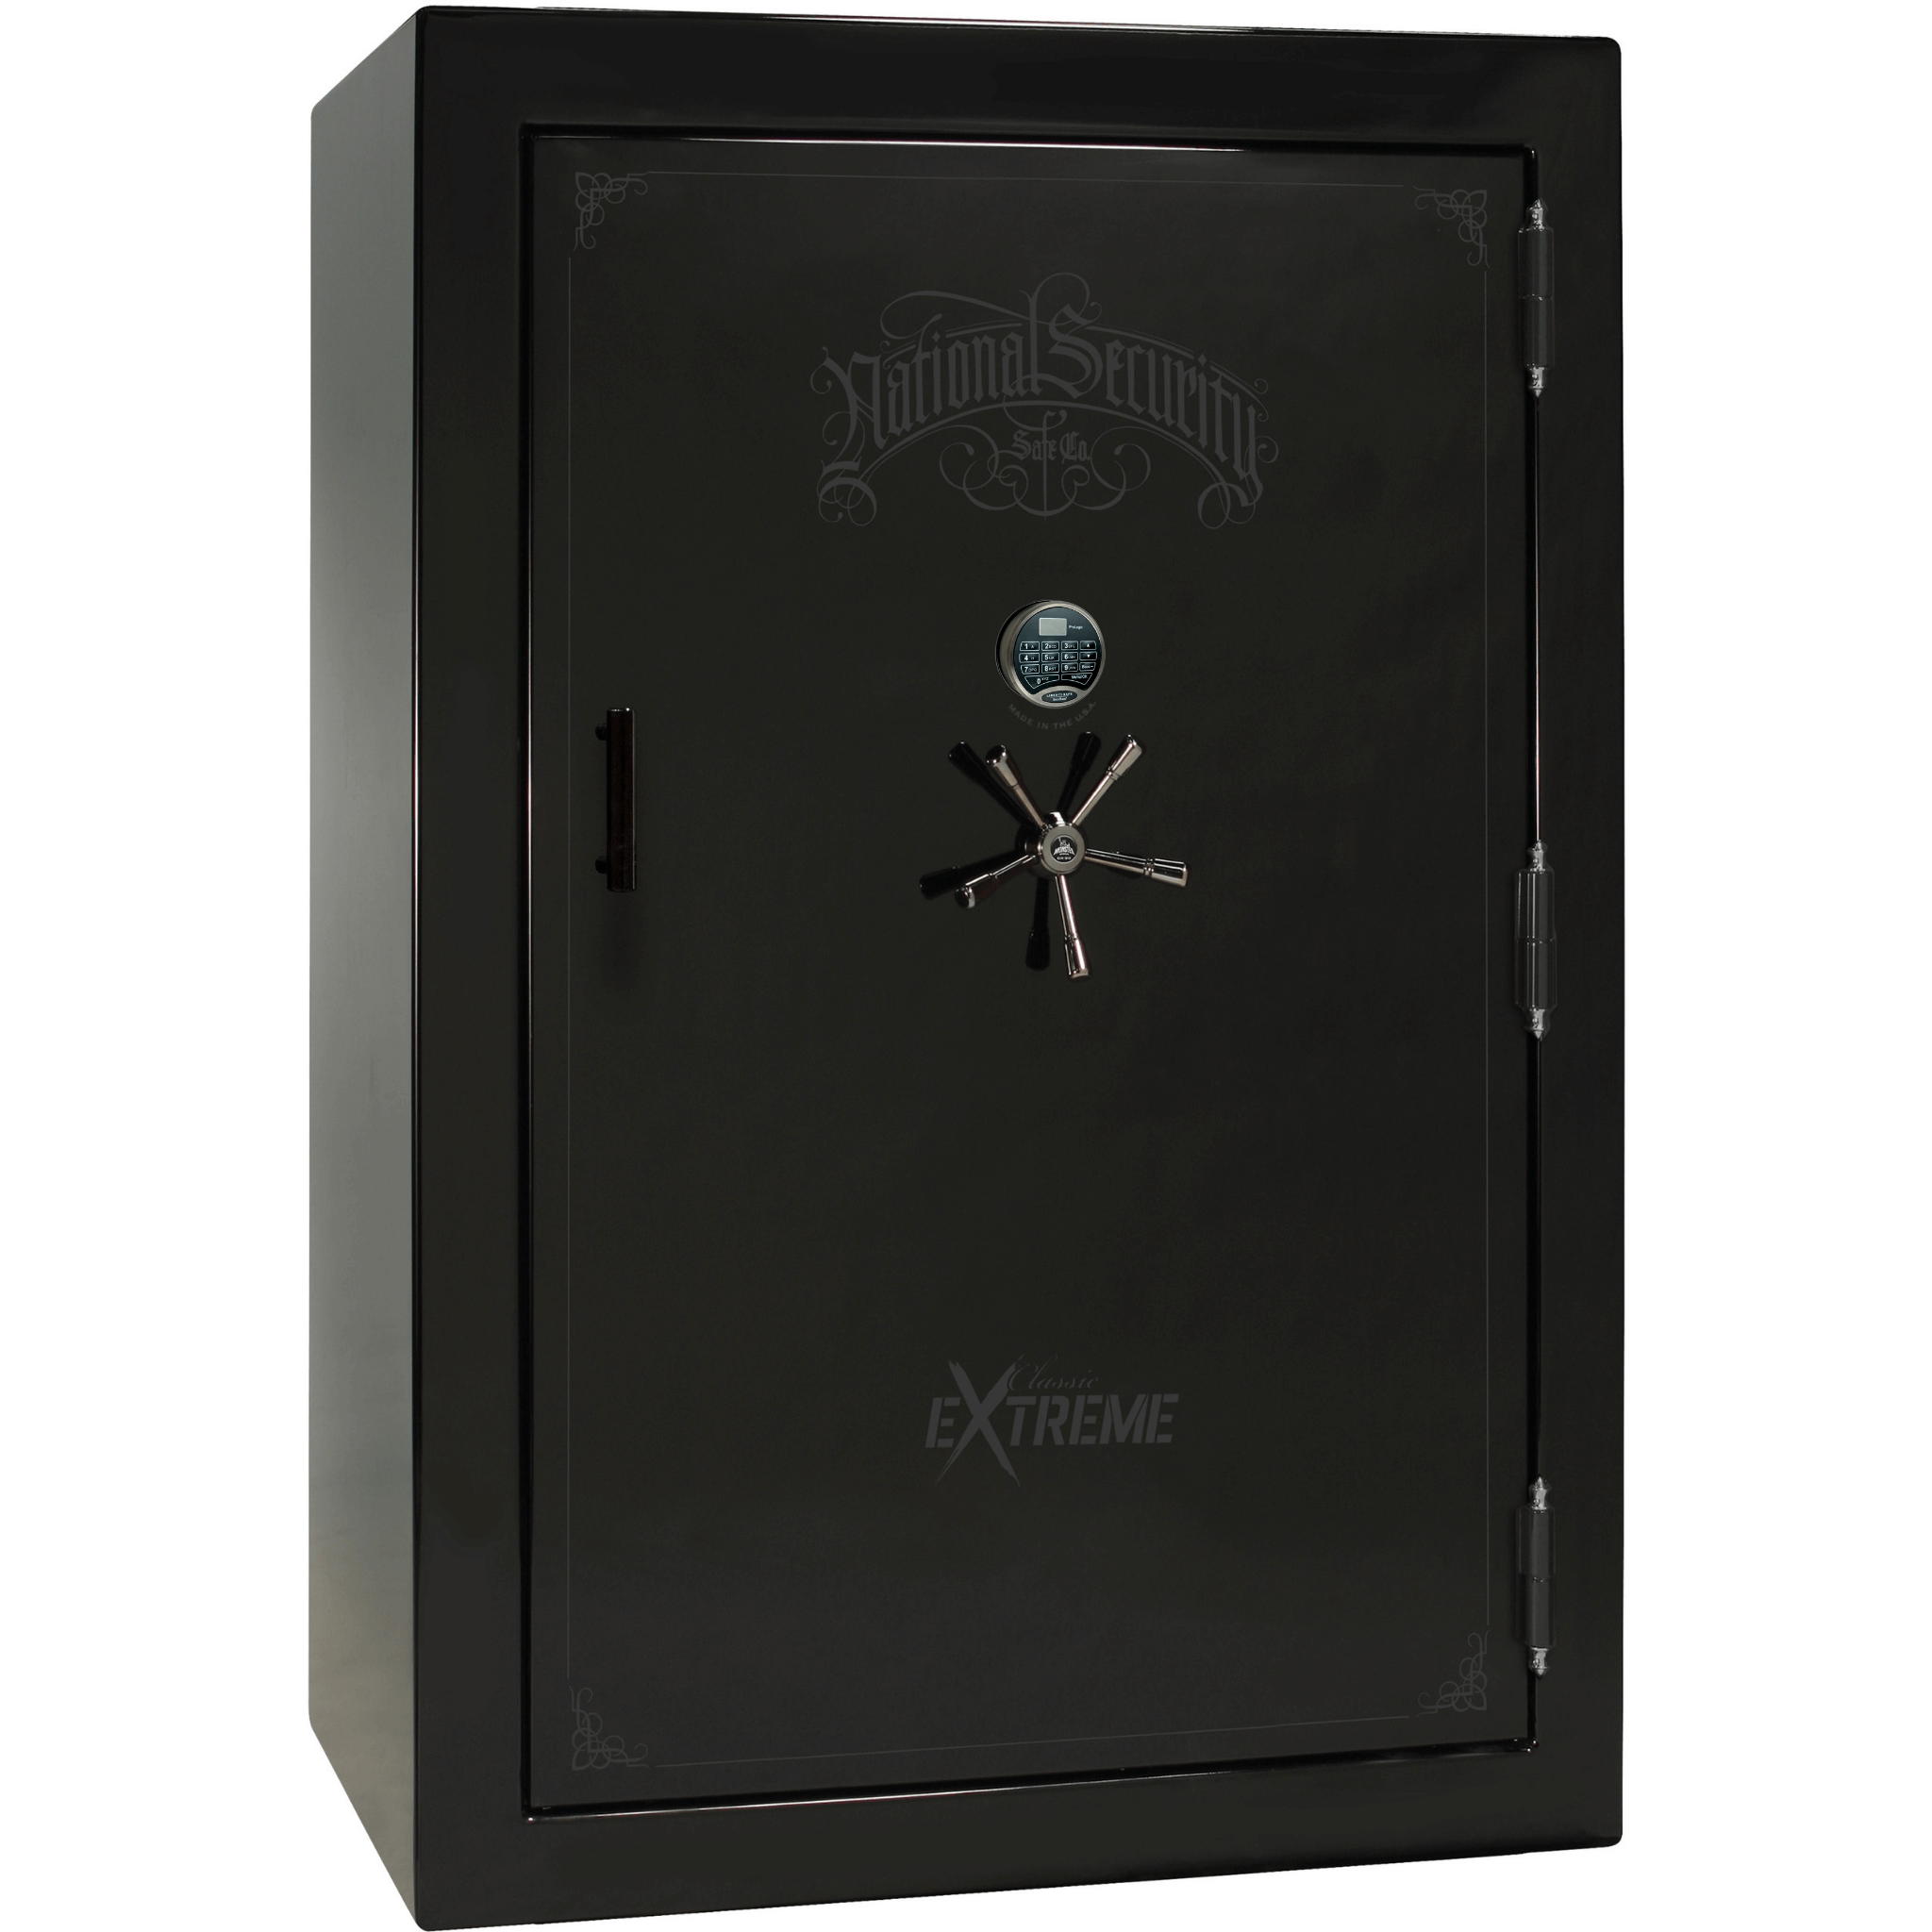 Liberty National Classic Select 60 Extreme Gun Safe with Electronic Lock, photo 35